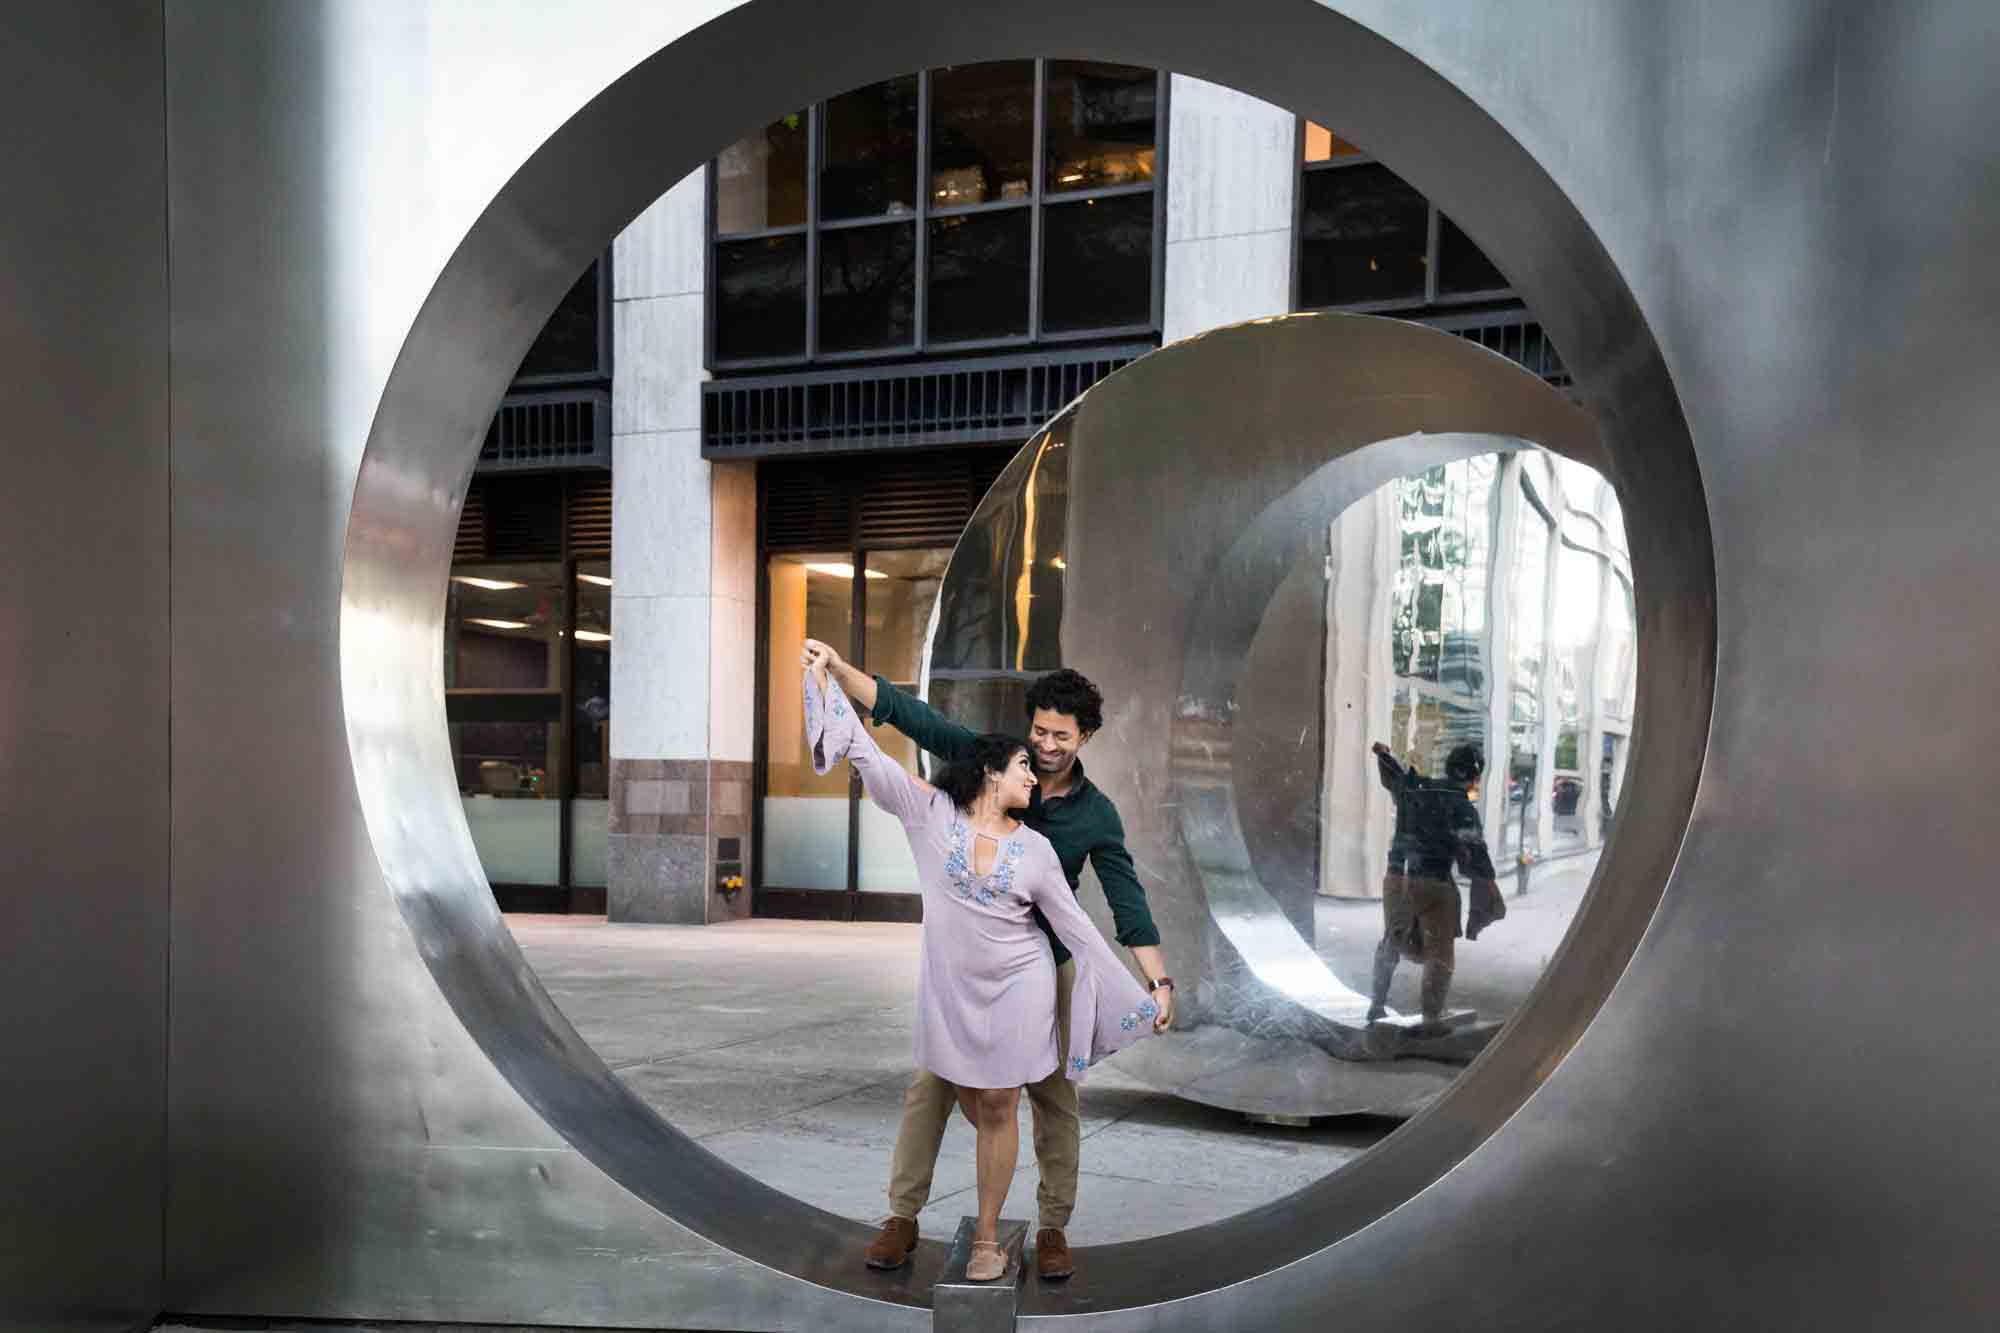 Couple dancing in circle of metallic sculpture in NYC